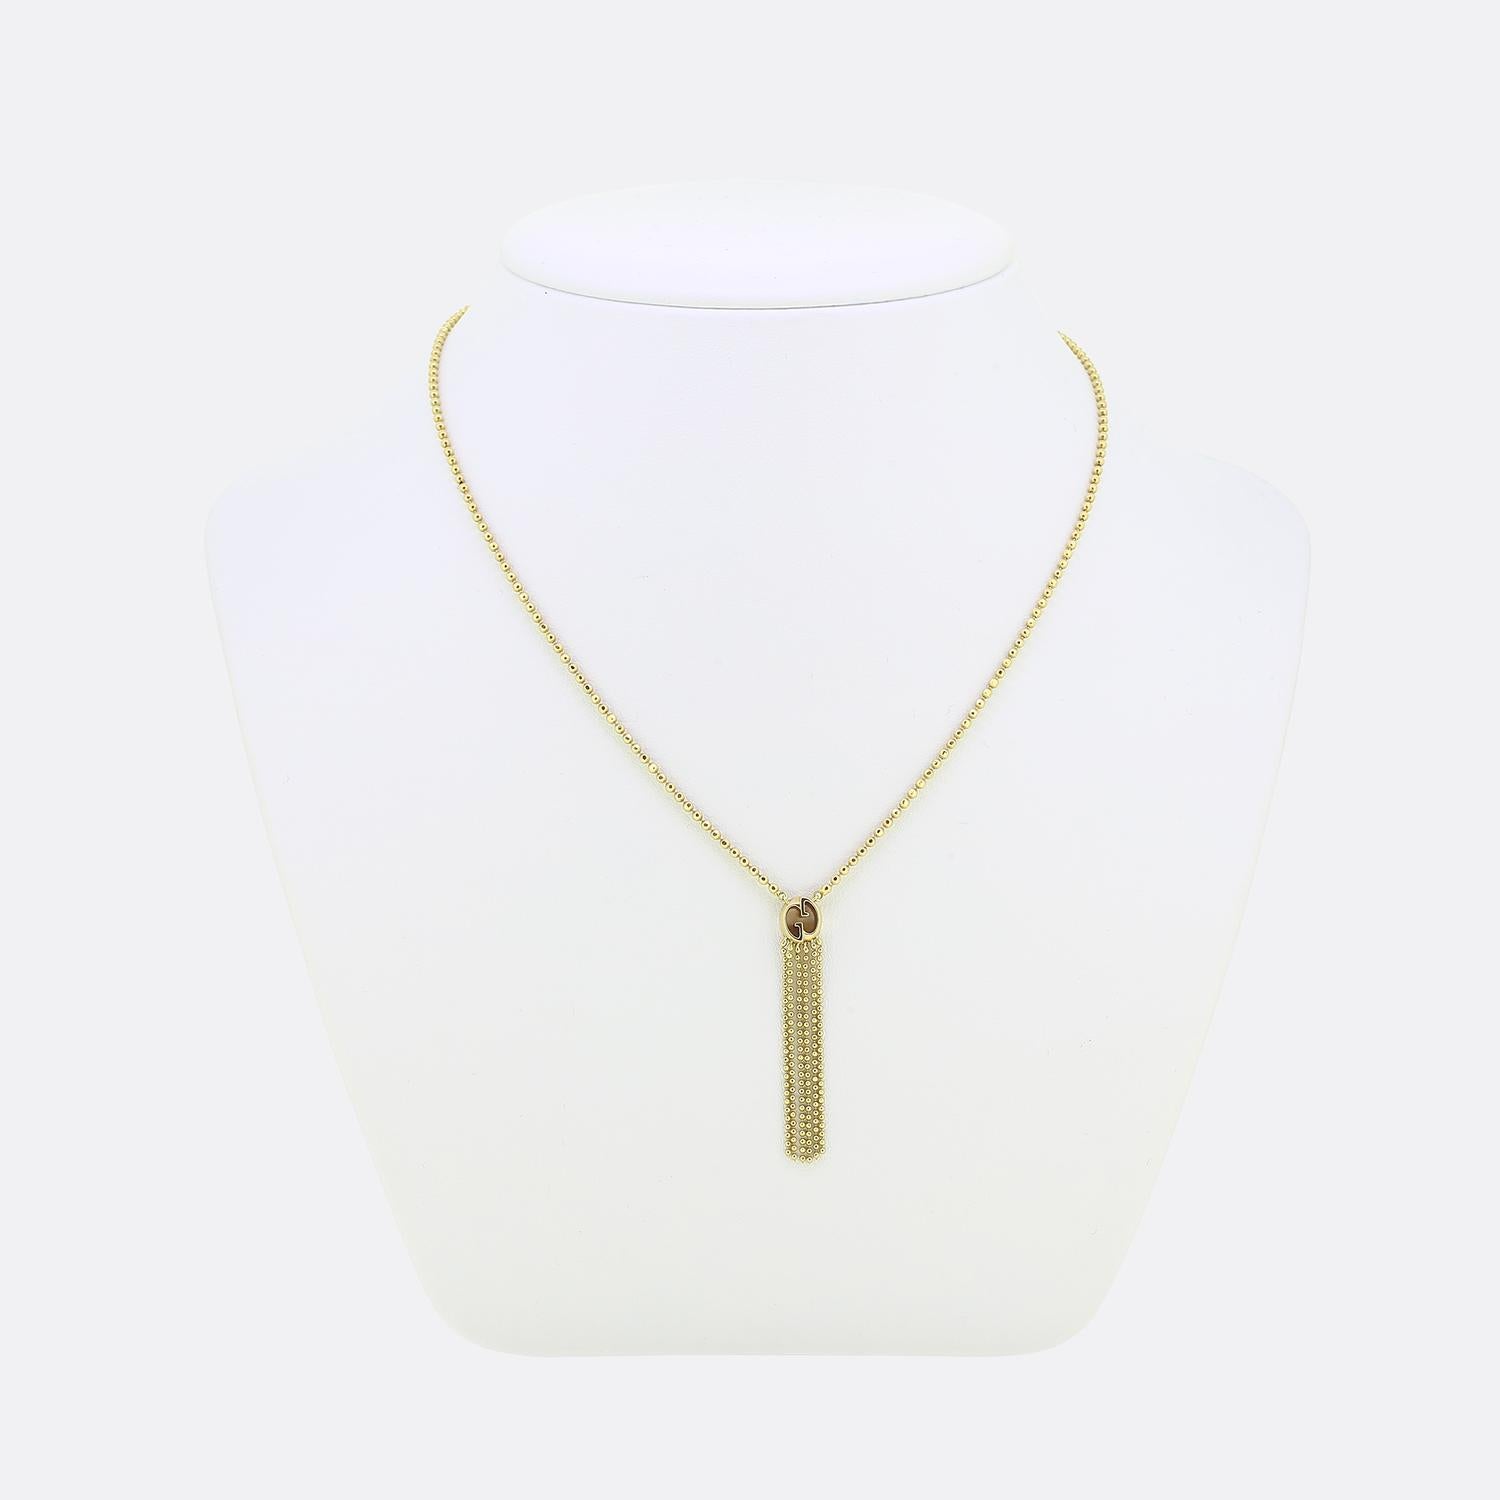 Here we have a tassel pendant necklace from the world renowned luxury designer, Gucci. This piece has been crafted from a rich 18ct yellow gold with the pendant forming the iconic double G logo shape which, in turn, plays host to 6 freely suspended